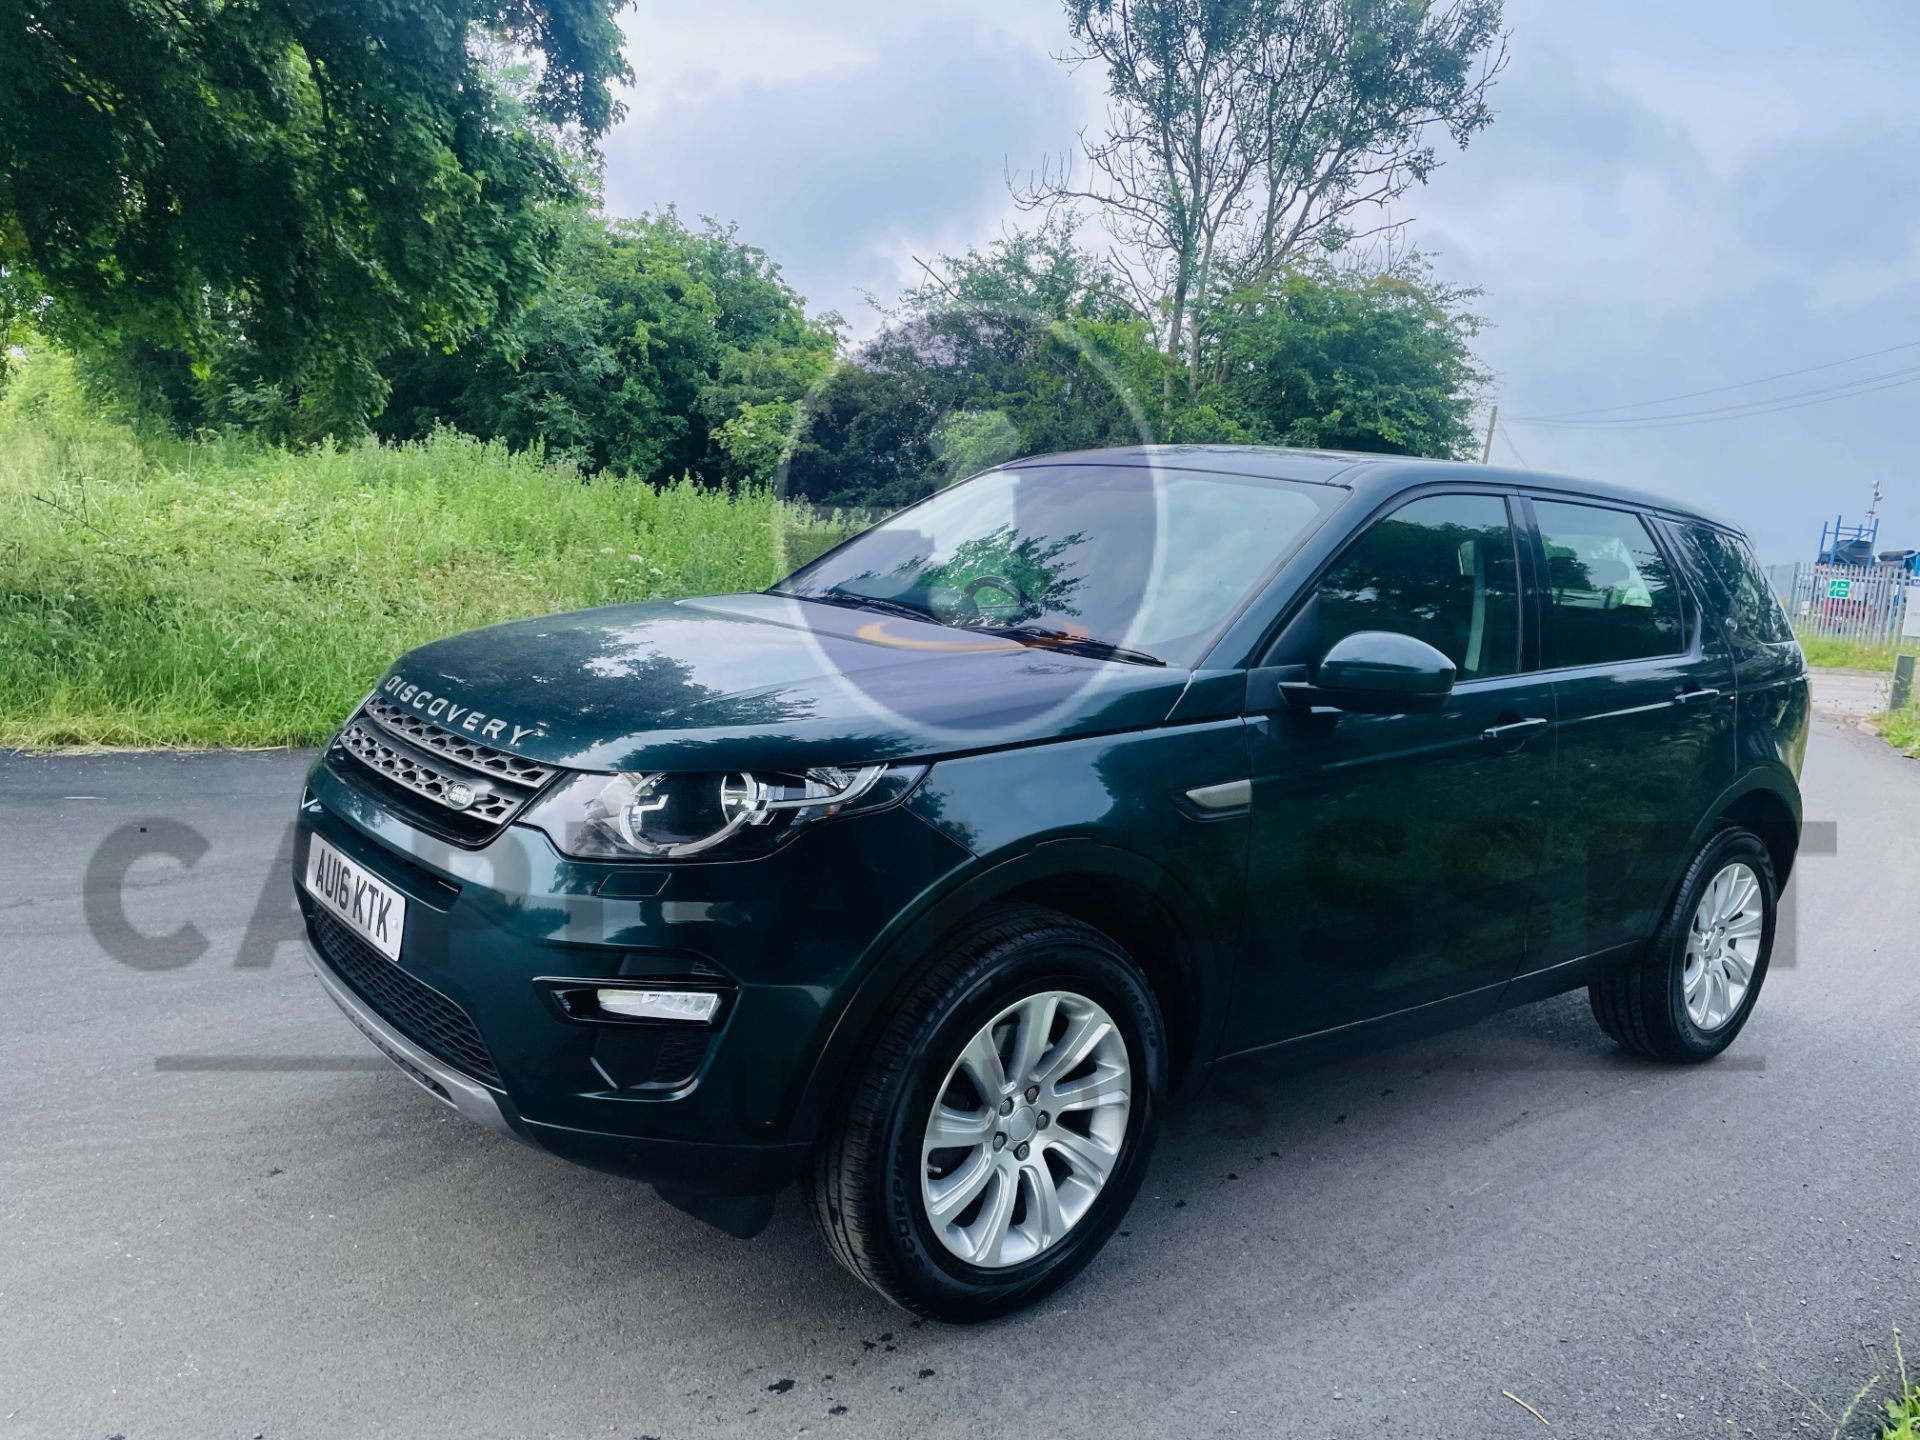 LAND ROVER DISCOVERY SPORT *SE TECH* 7 SEATER SUV (2016) 2.0 TD4 - AUTO *LEATHER & NAV* (NO VAT) - Image 6 of 54